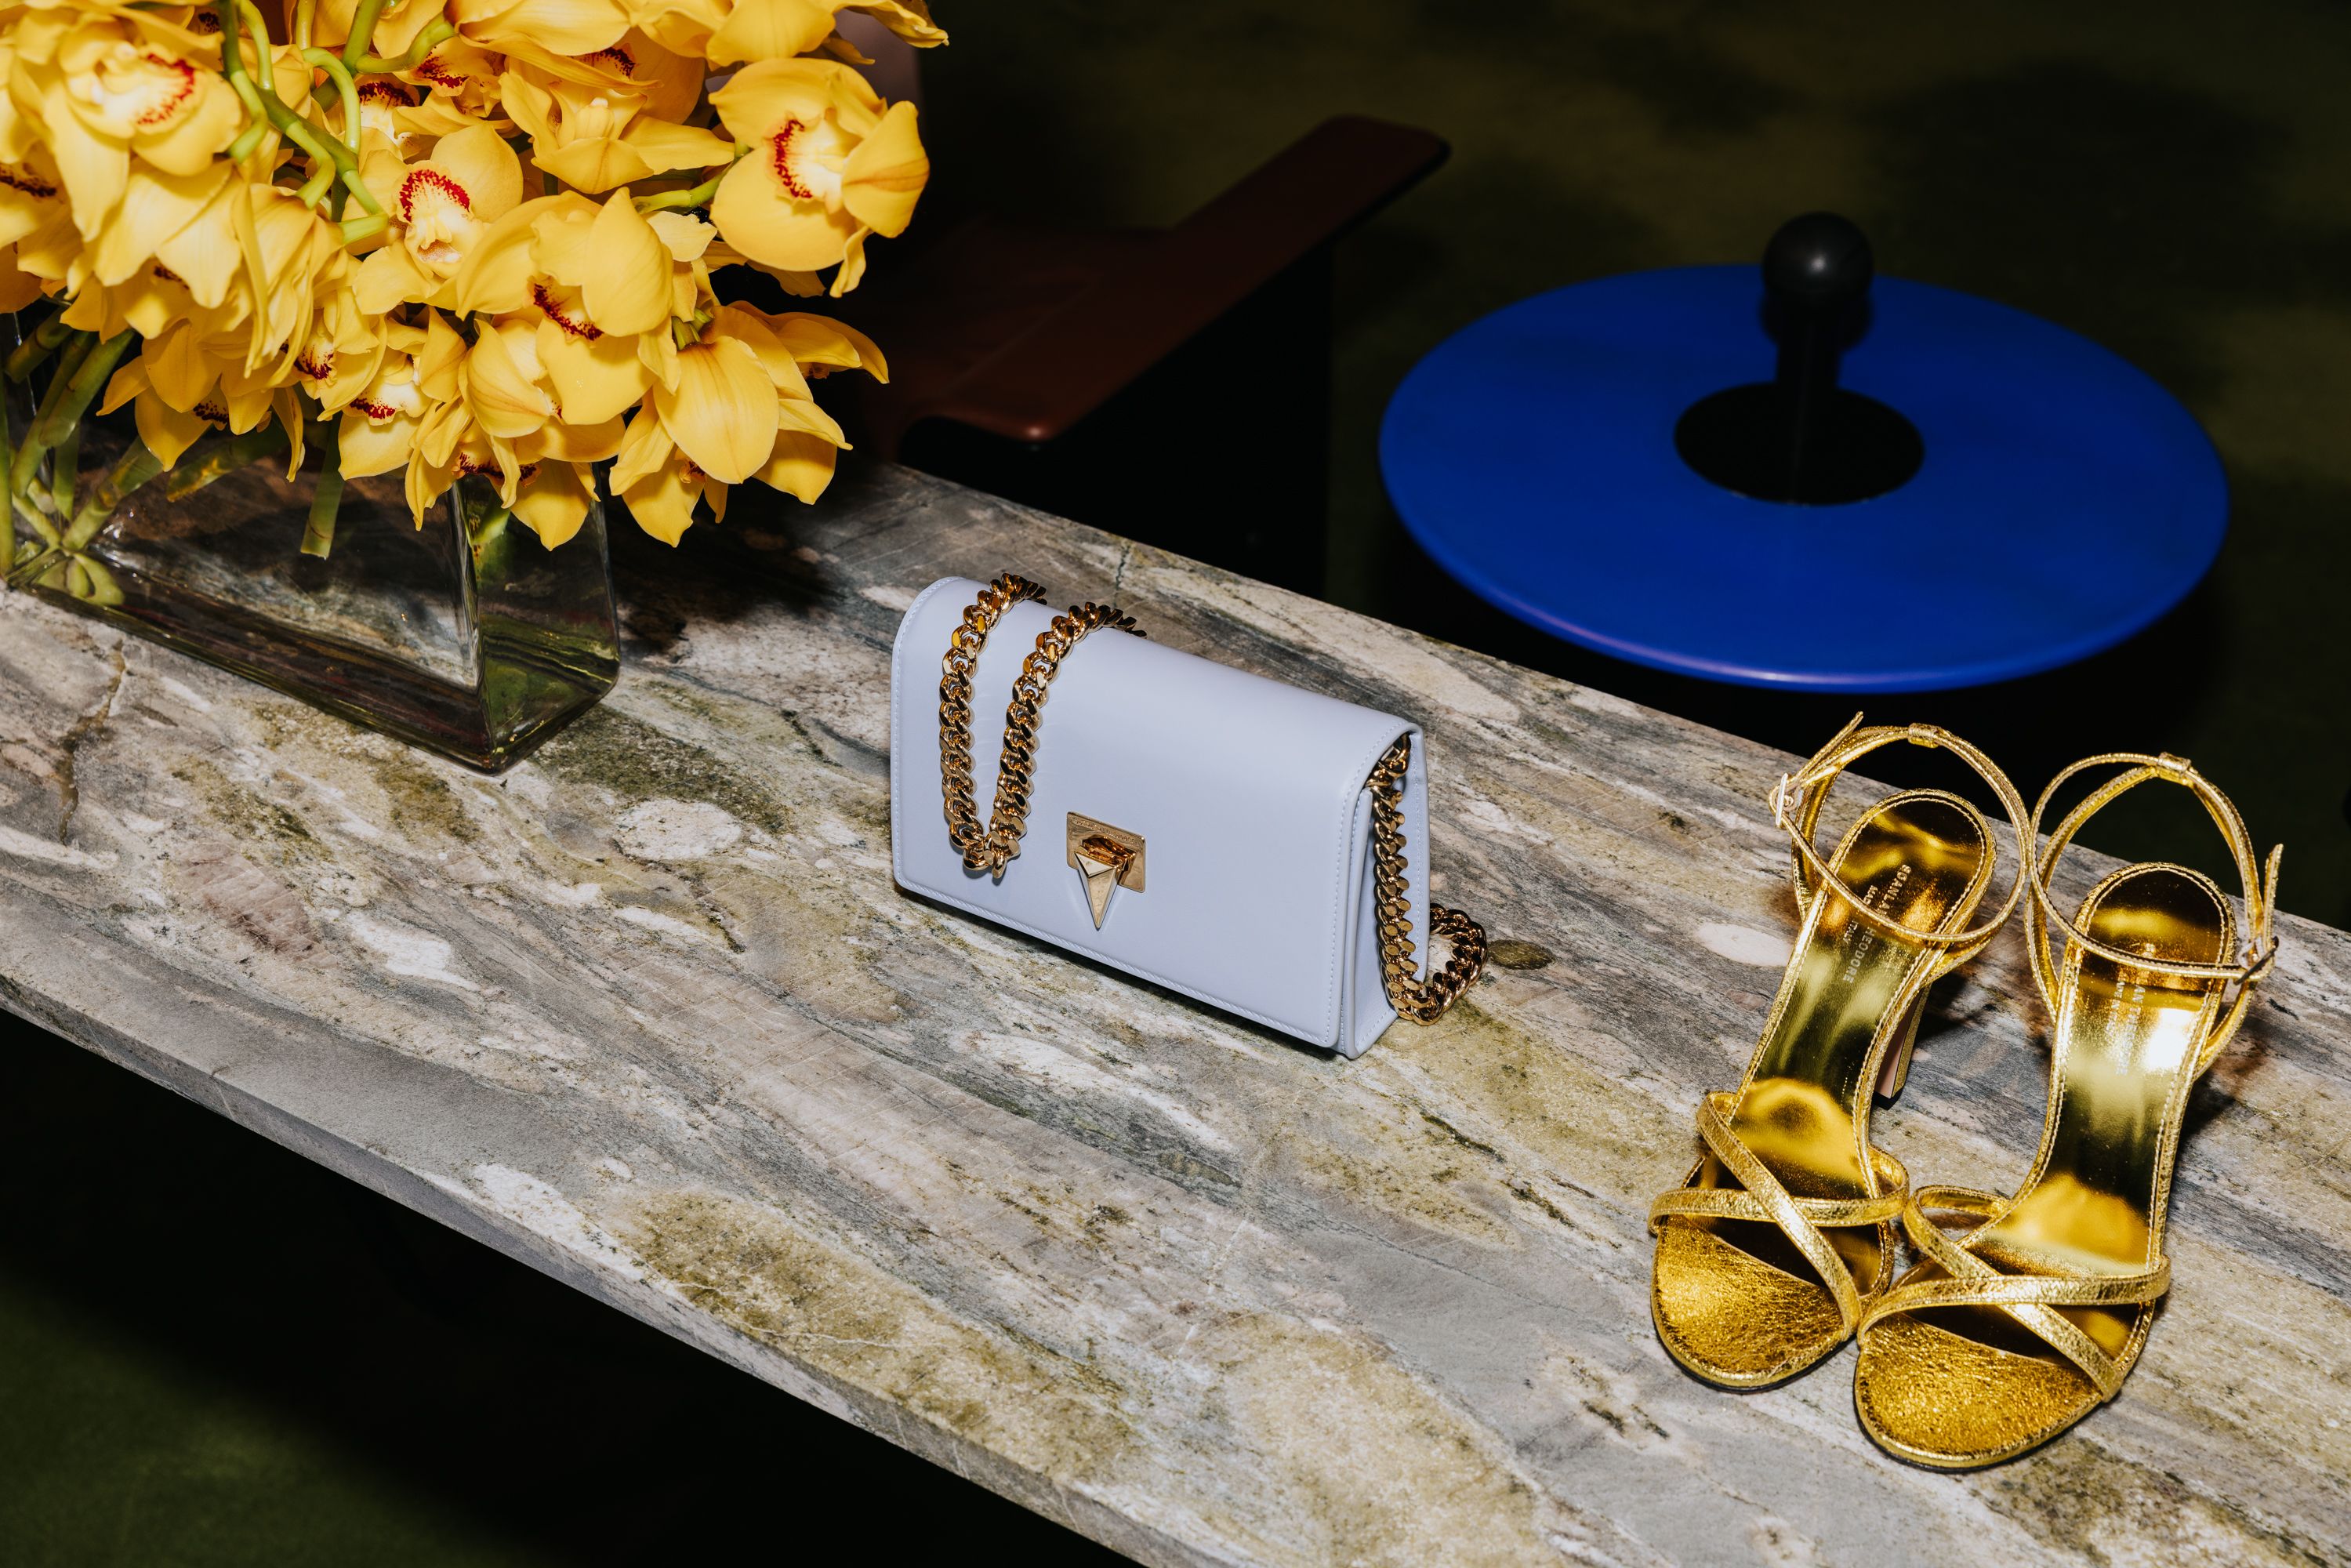 Close up of table with yellow flowers, gold strappy heels and a baby blue leather bag